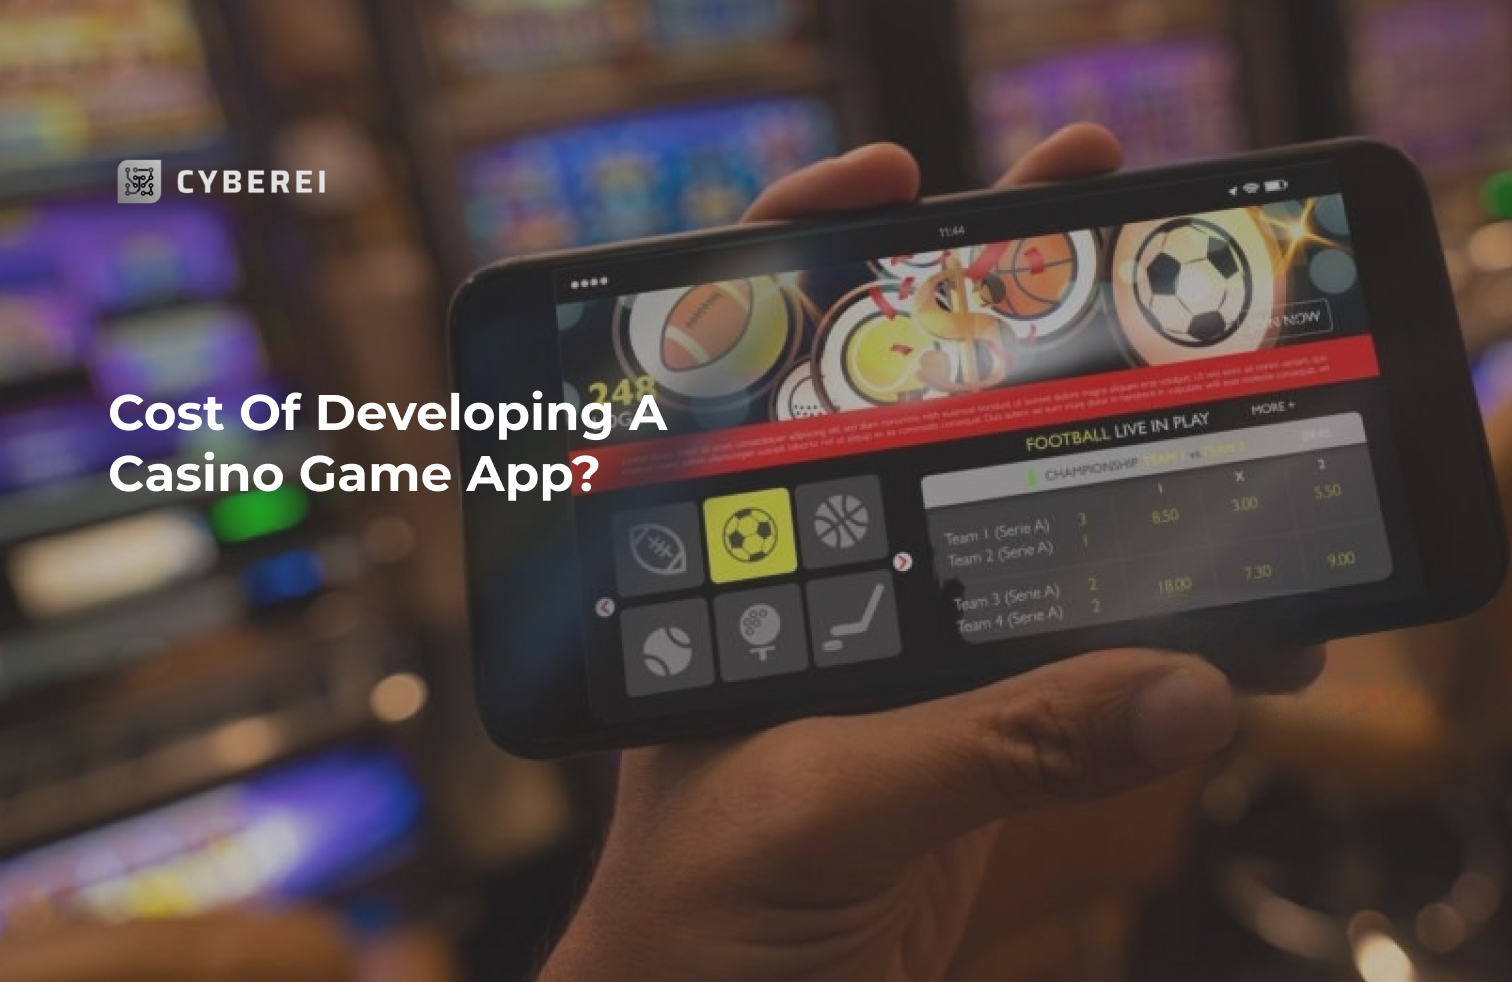 Cost to develop a casino game app?